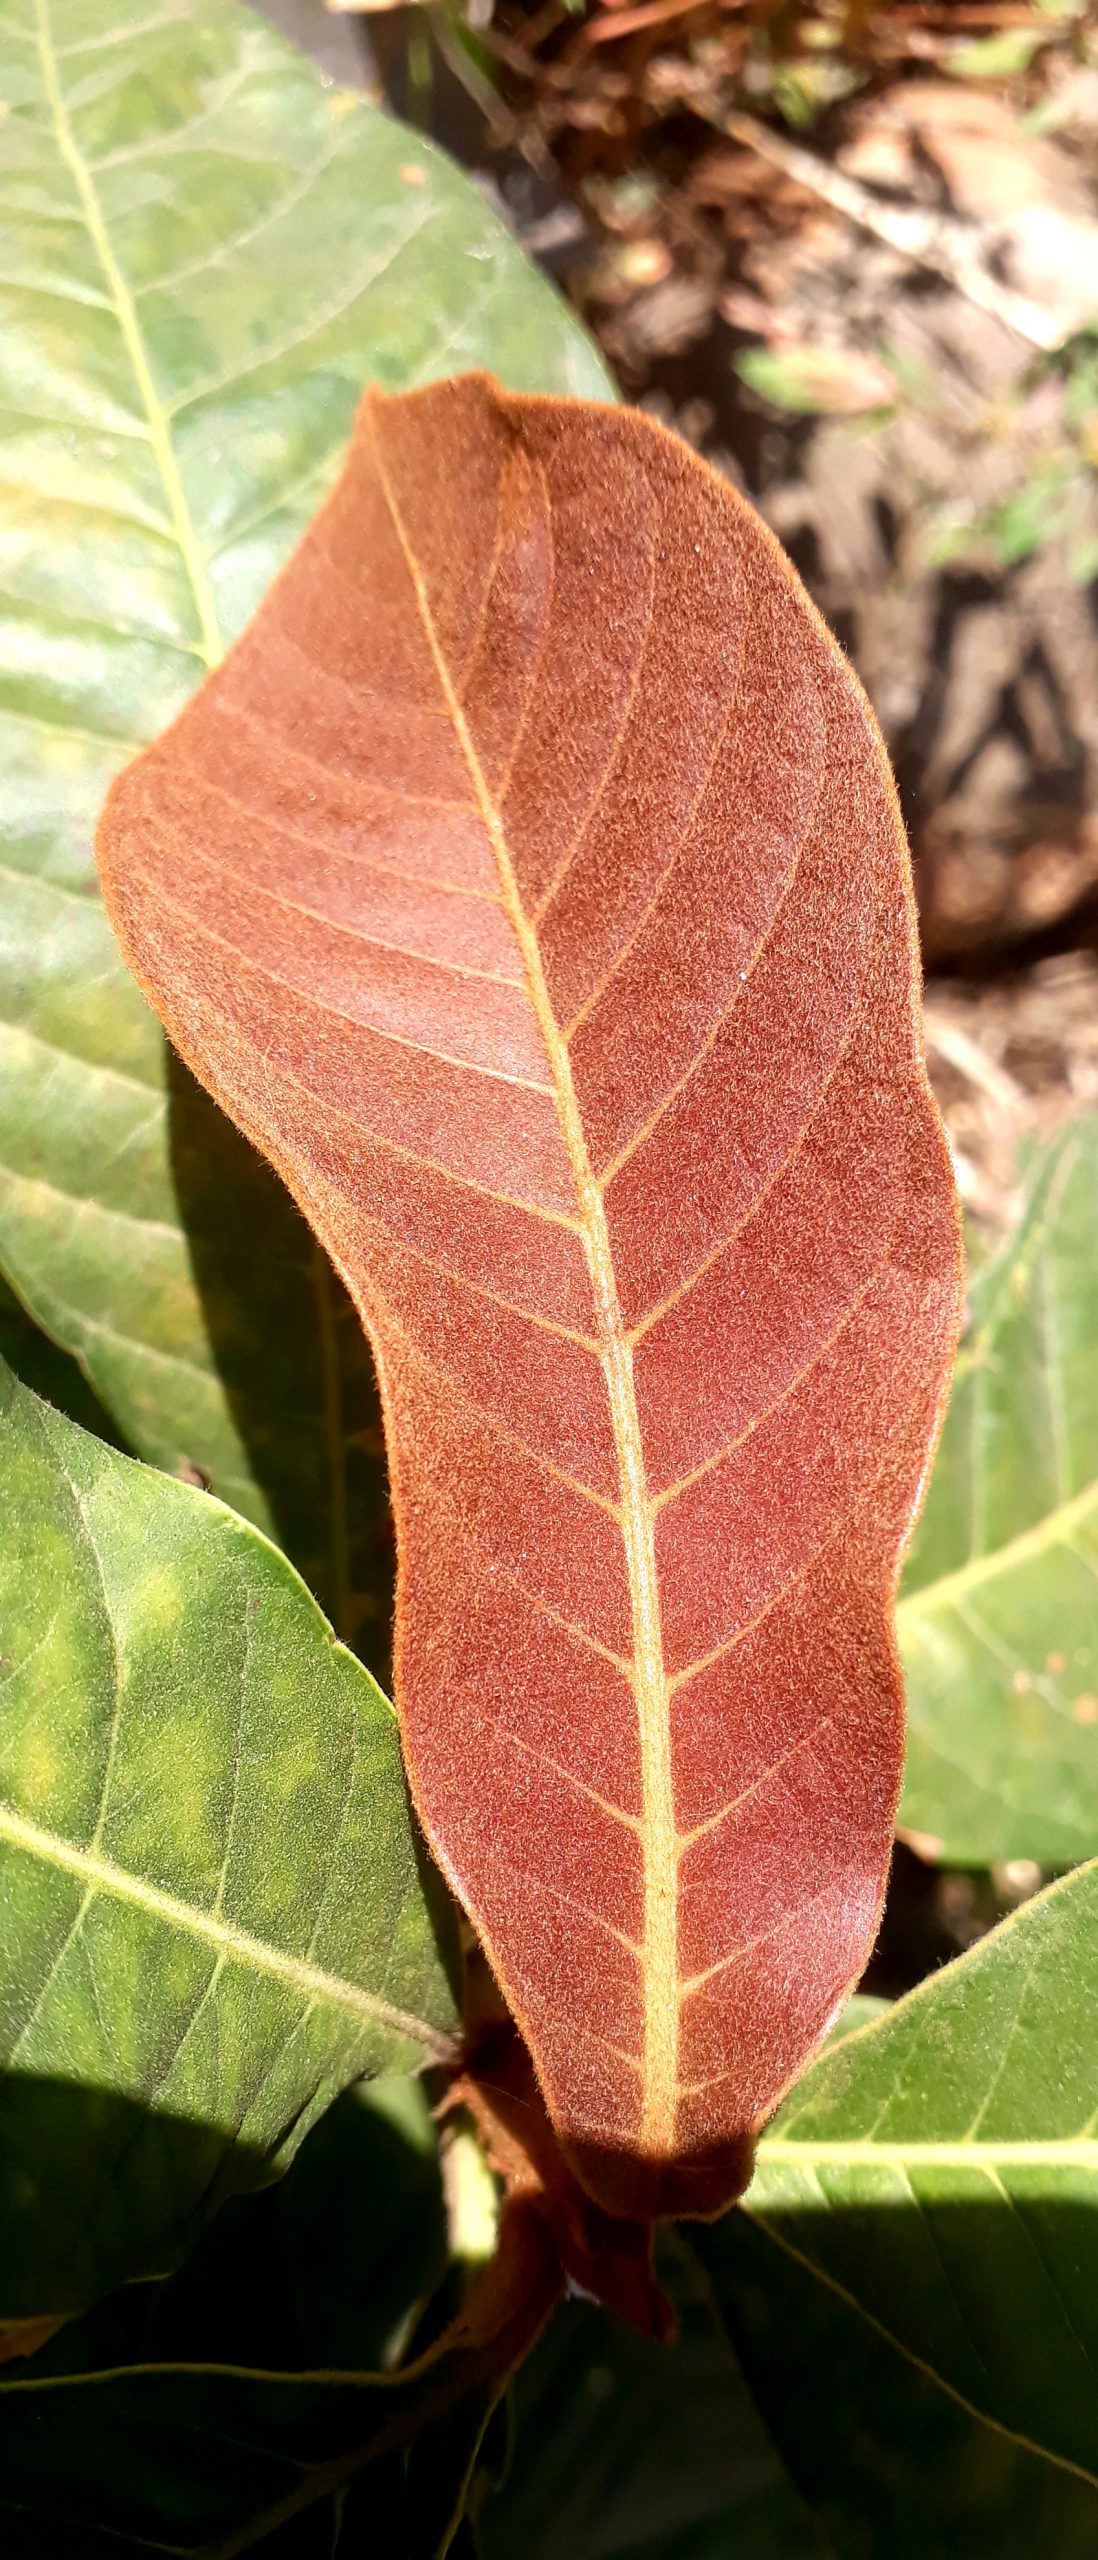 Leaves of a plant